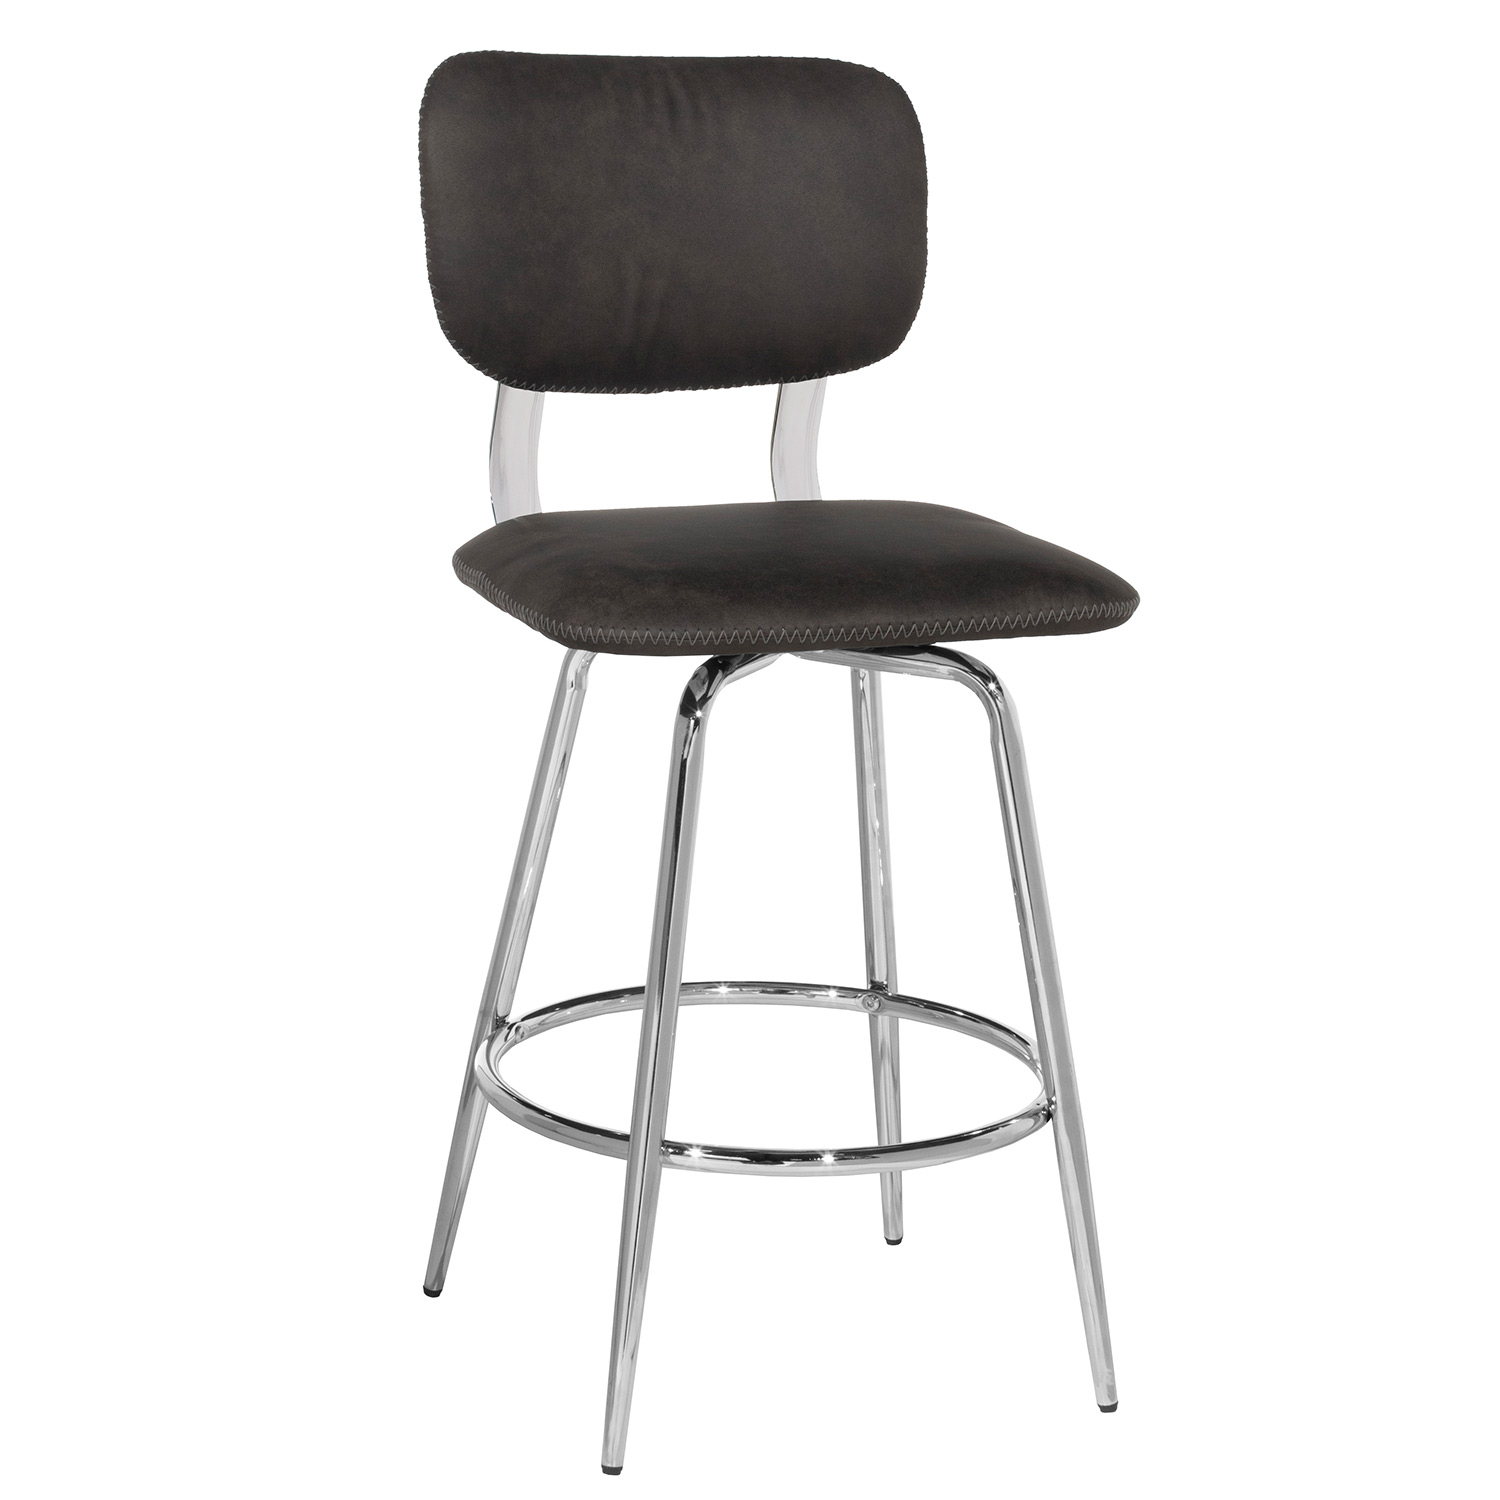 Hillsdale Bloomfield Retro Metal Swivel Counter Height Stool - Chrome- Set of 2